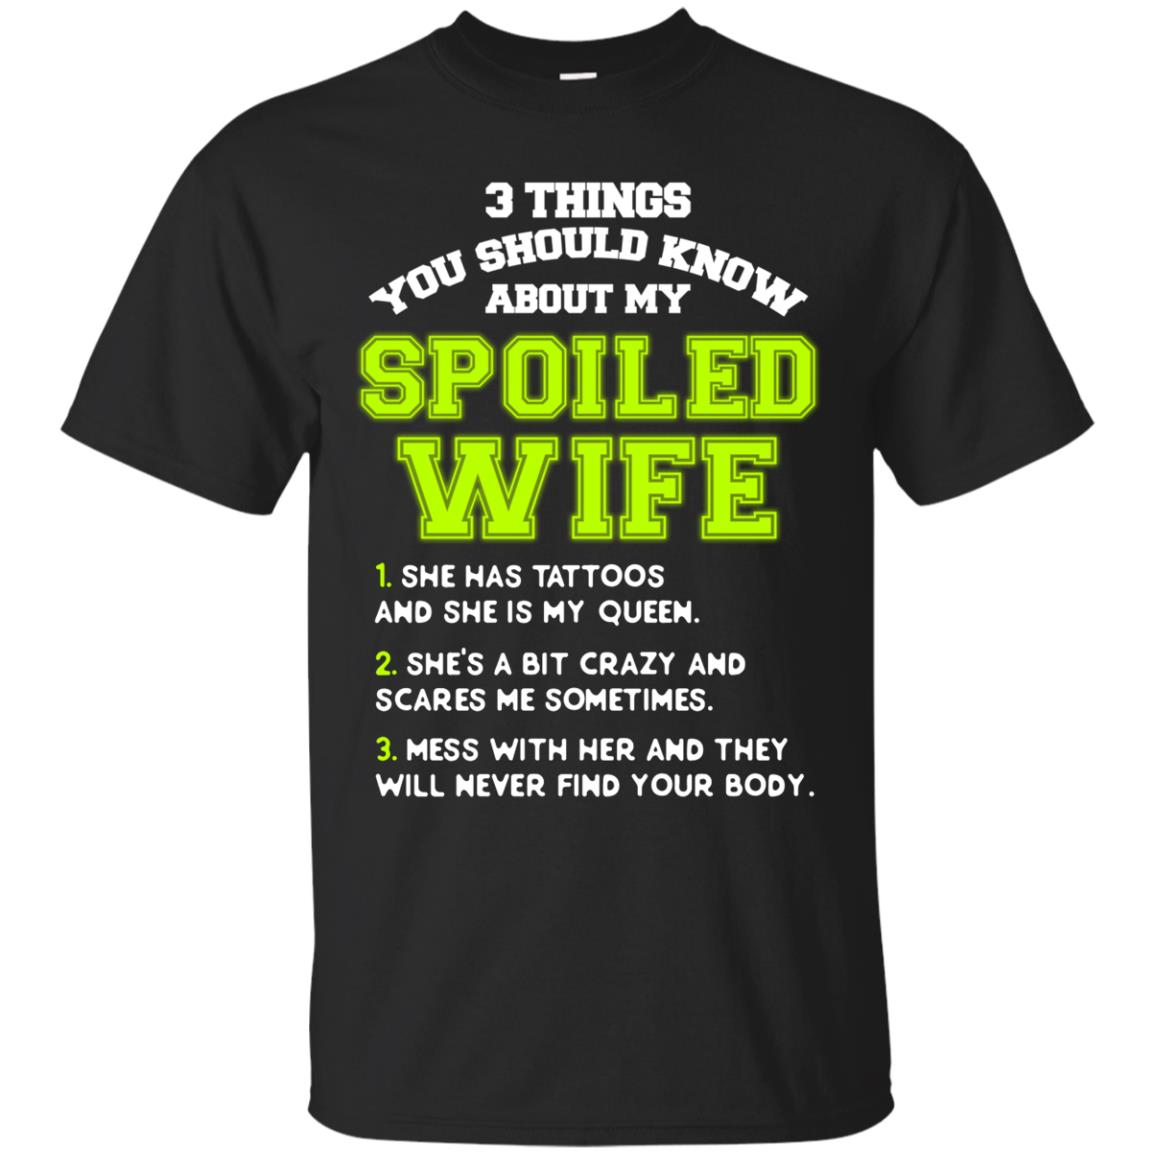 3 Things You Should Know About My Spoiled Wife Shirt For HusbandG200 Gildan Ultra Cotton T-Shirt